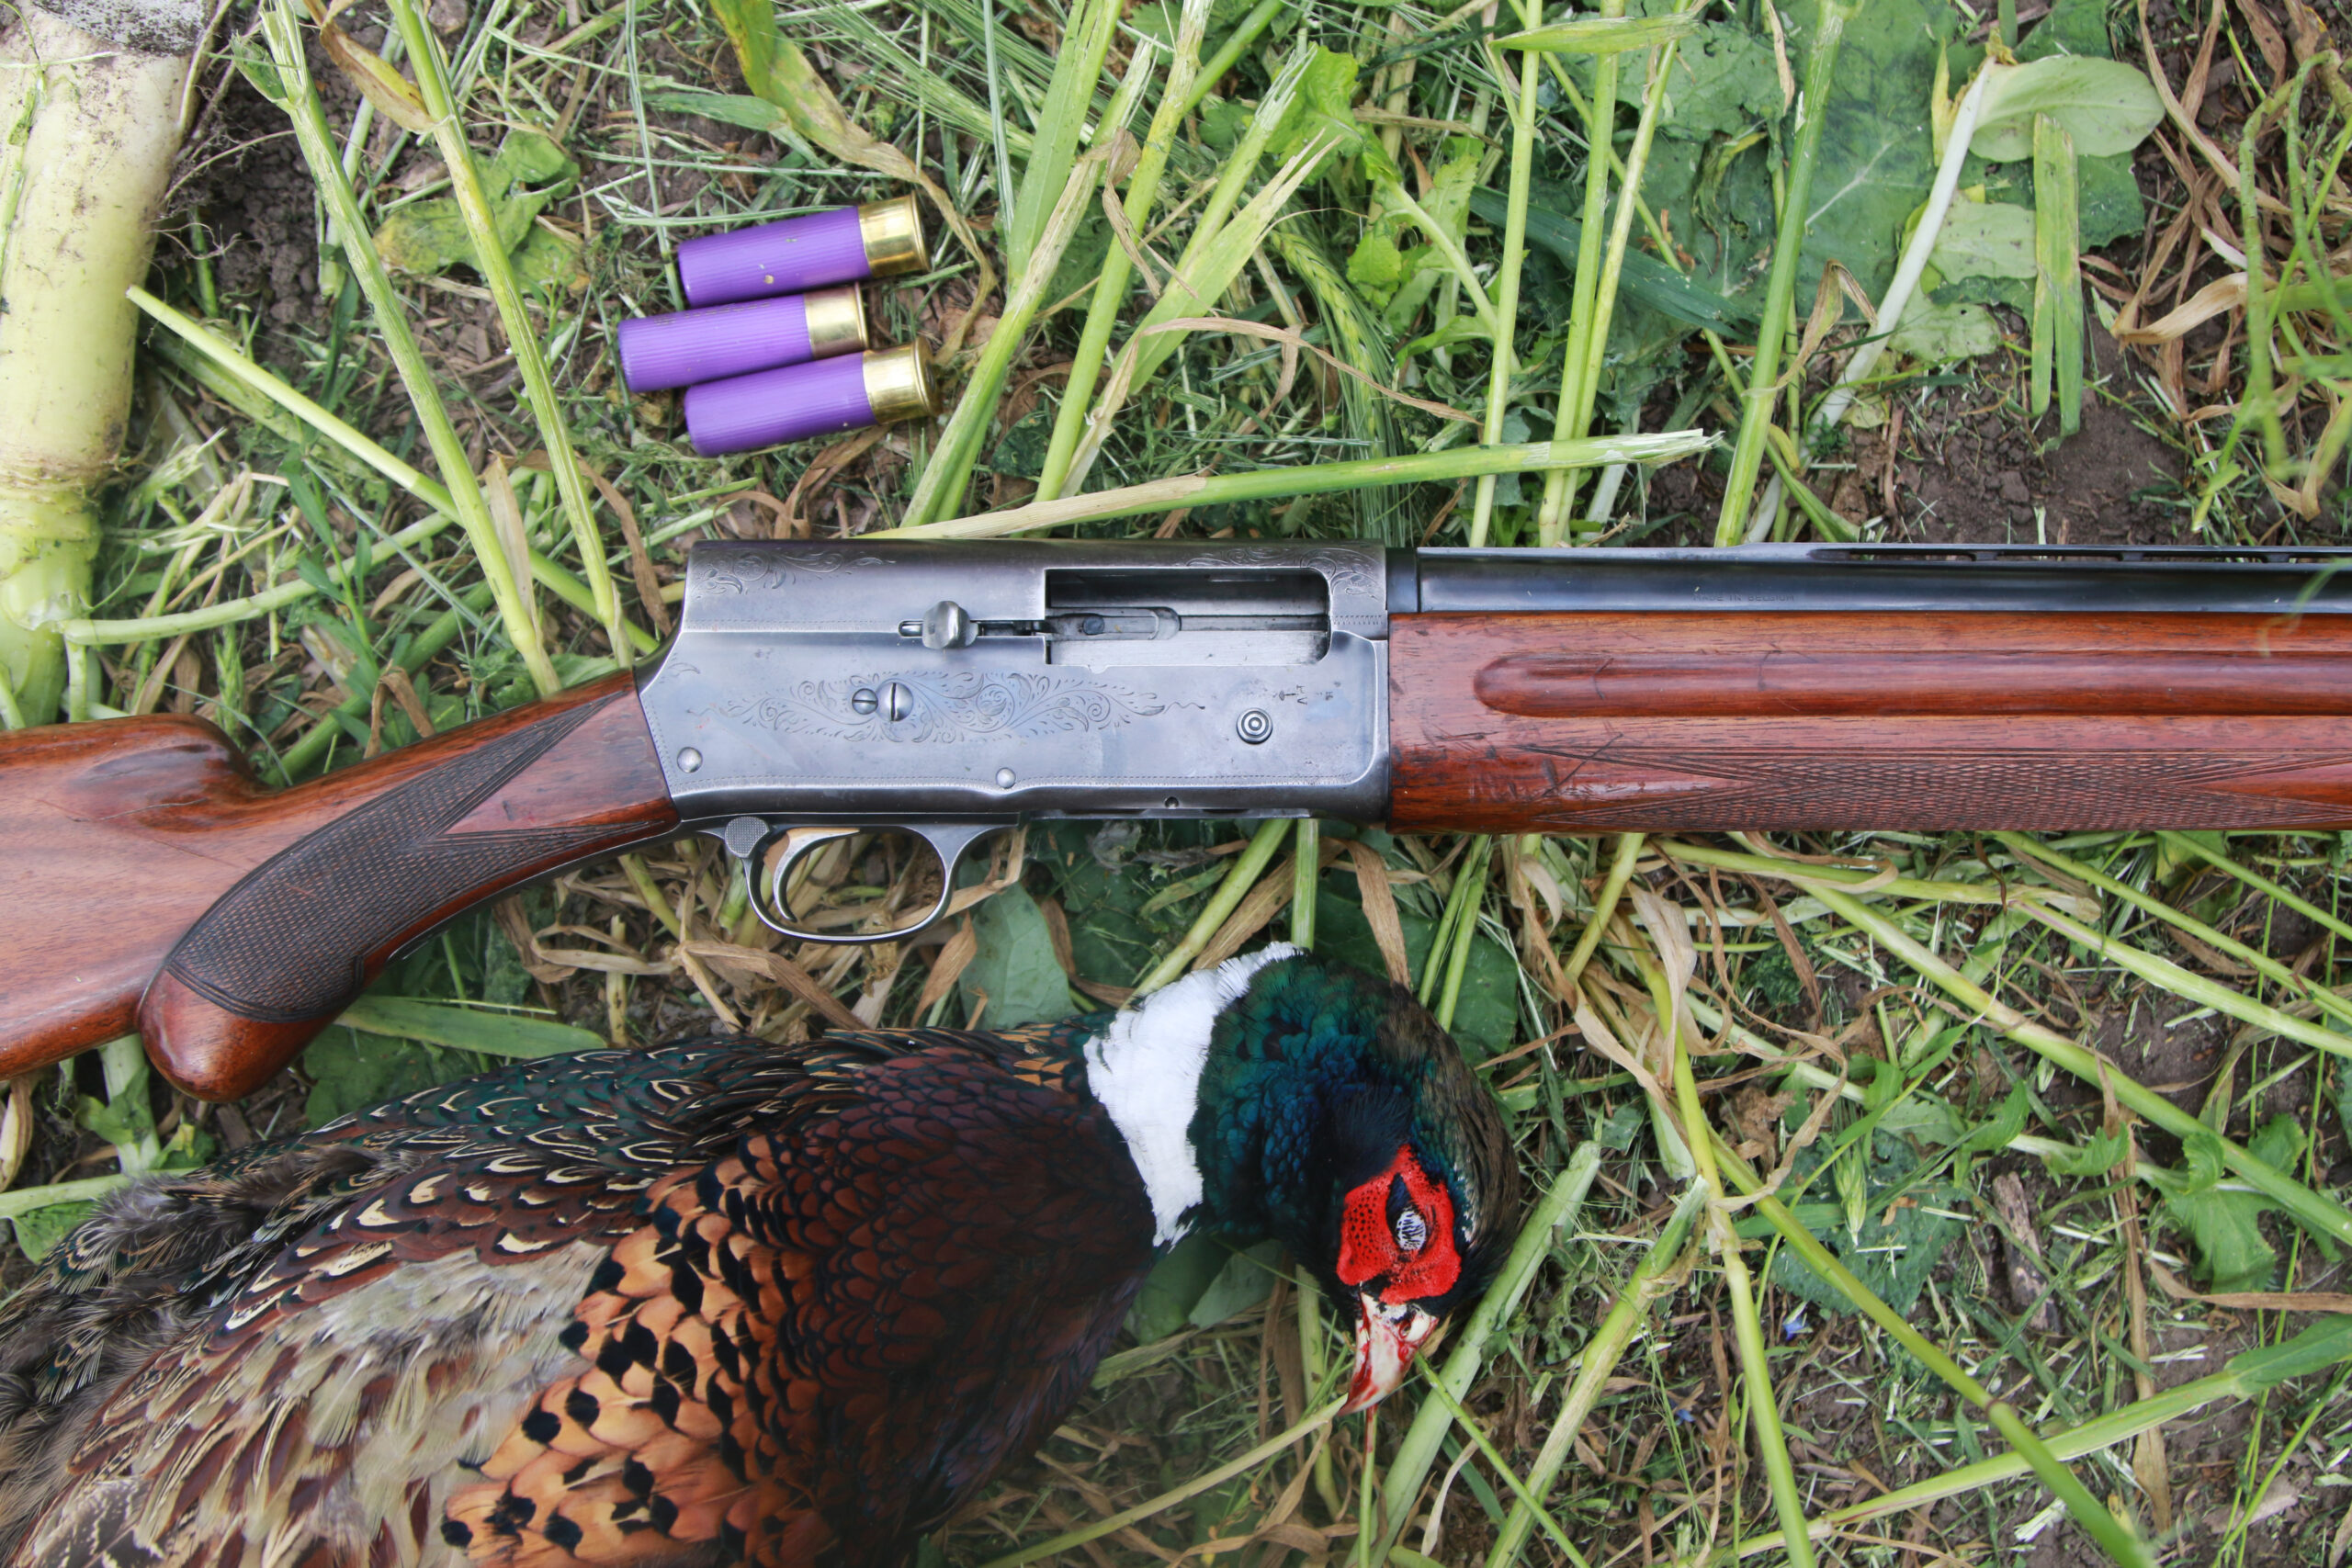 A ring-necked rooster pheasant beside a shotgun and three purple 16-gauge shells